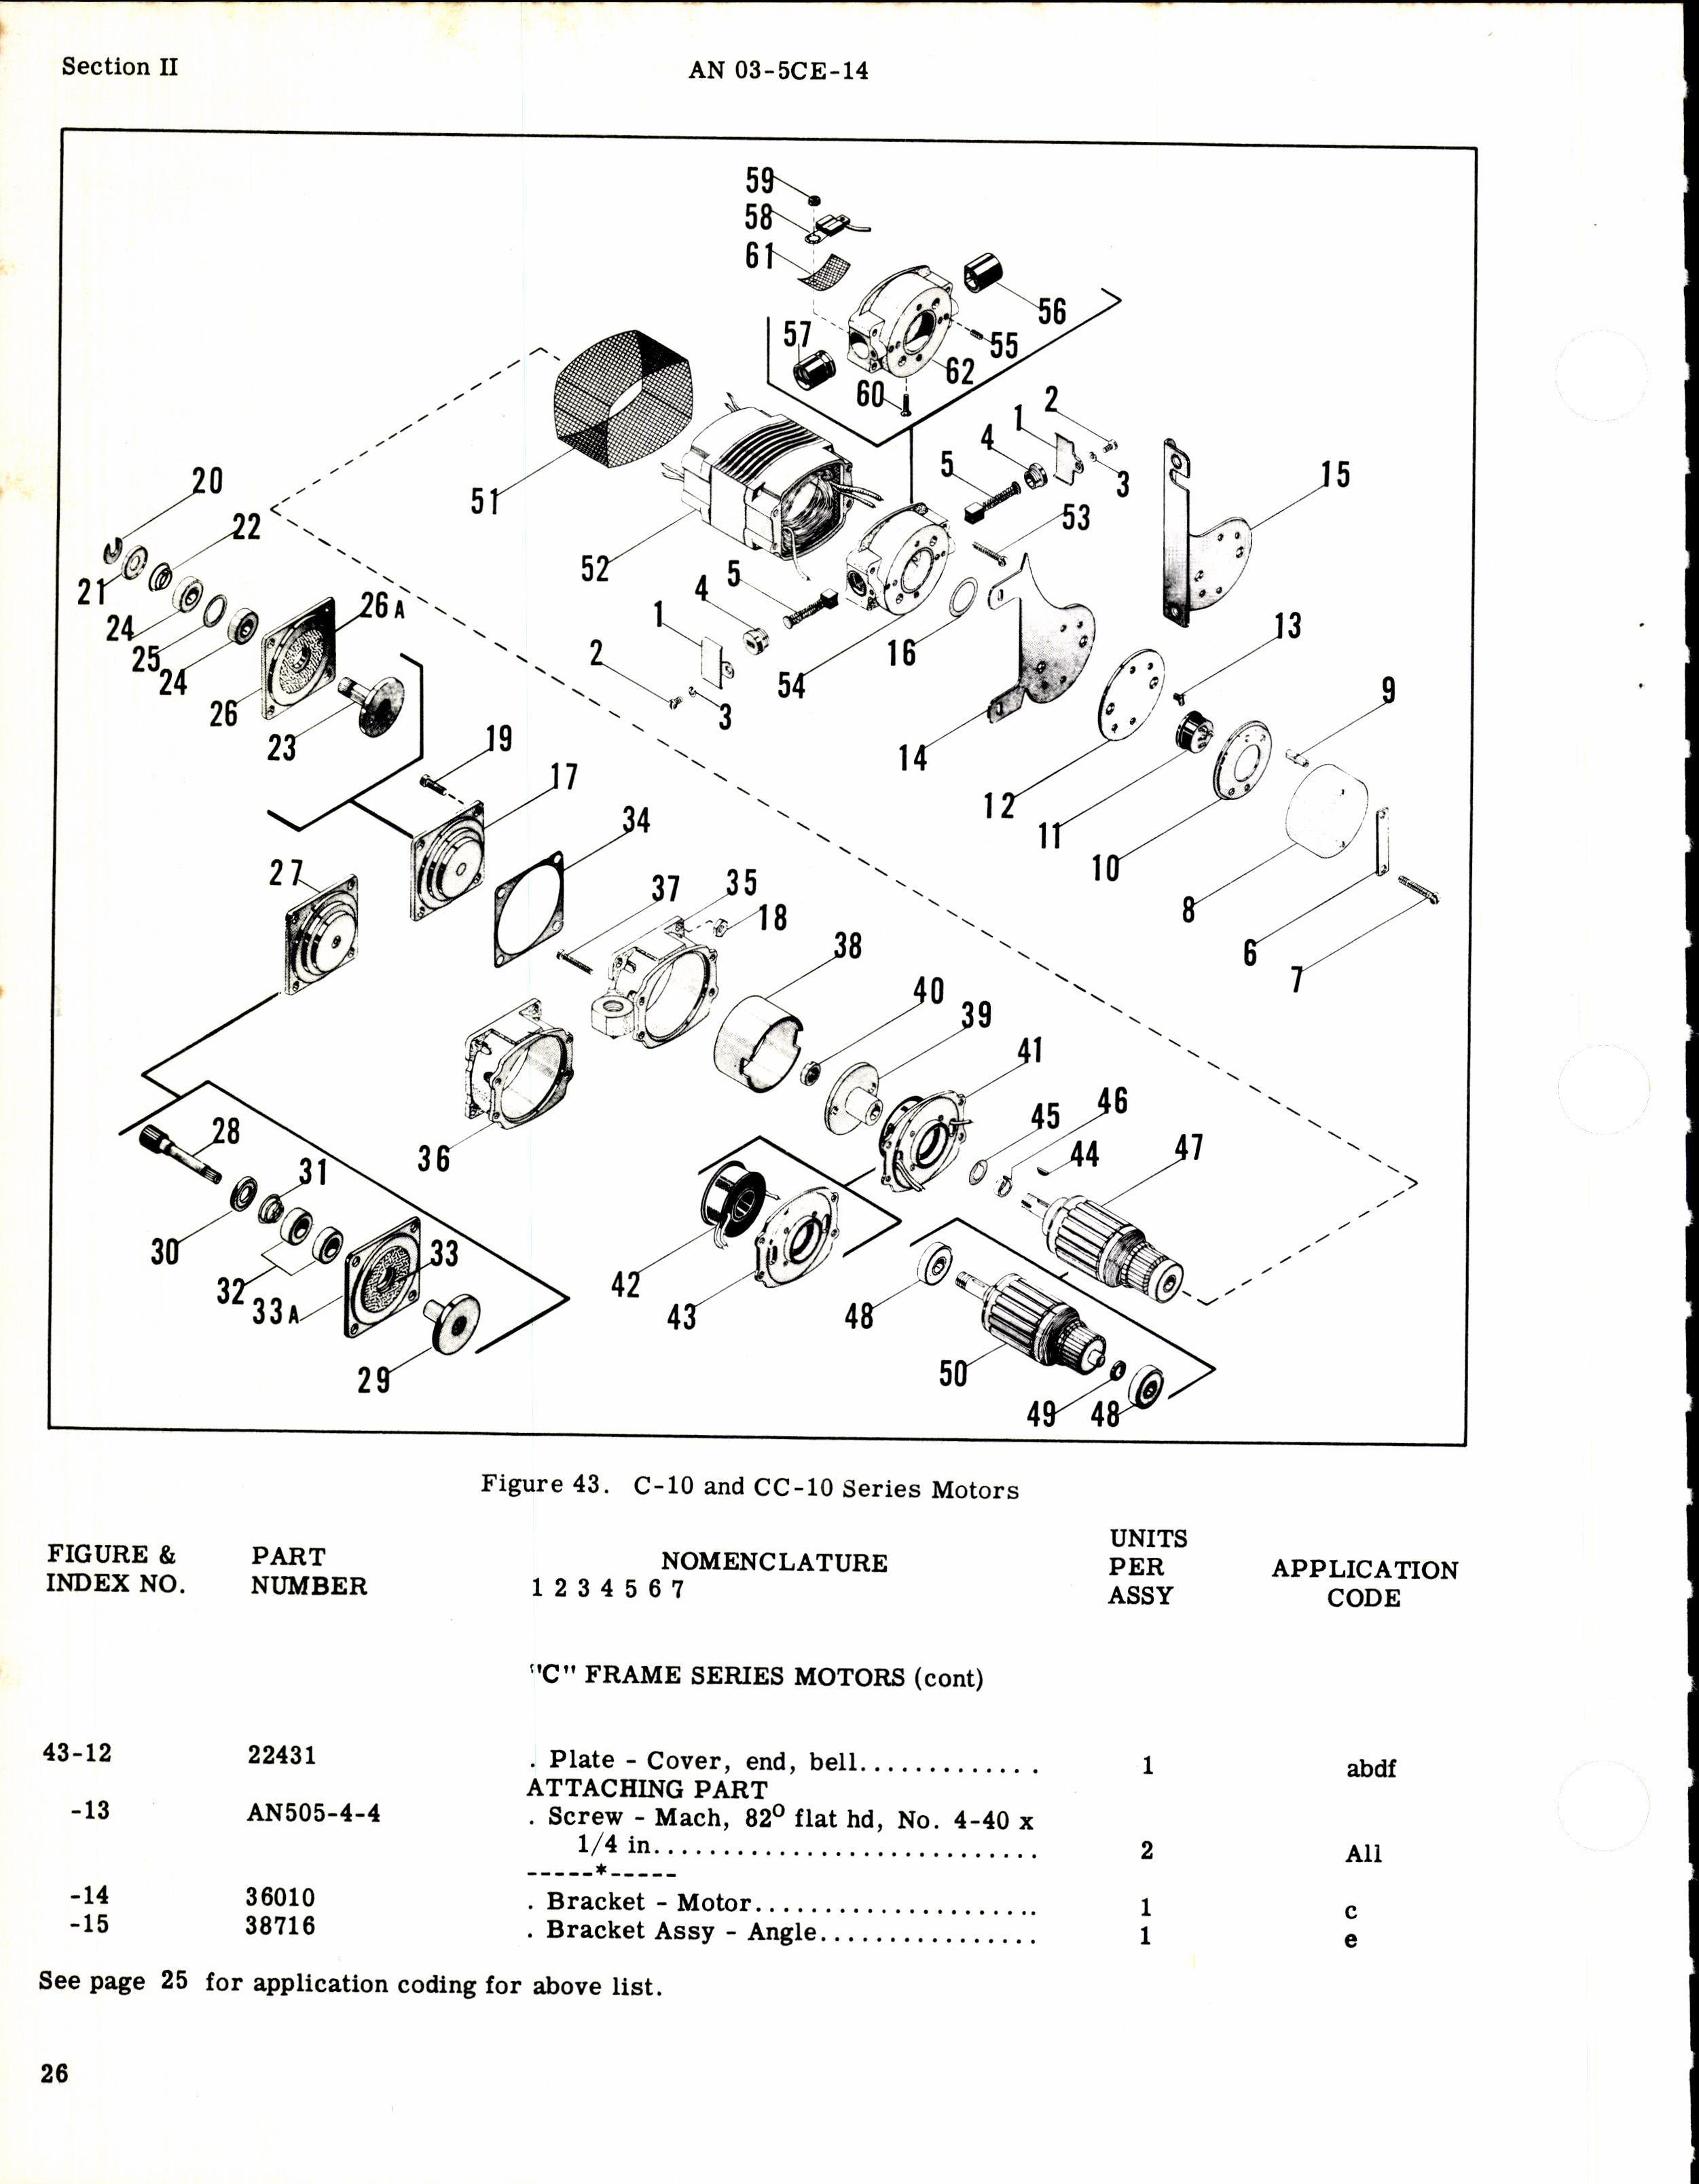 Sample page 8 from AirCorps Library document: Parts Catalog for Lear Control Box Assemblies and Motors